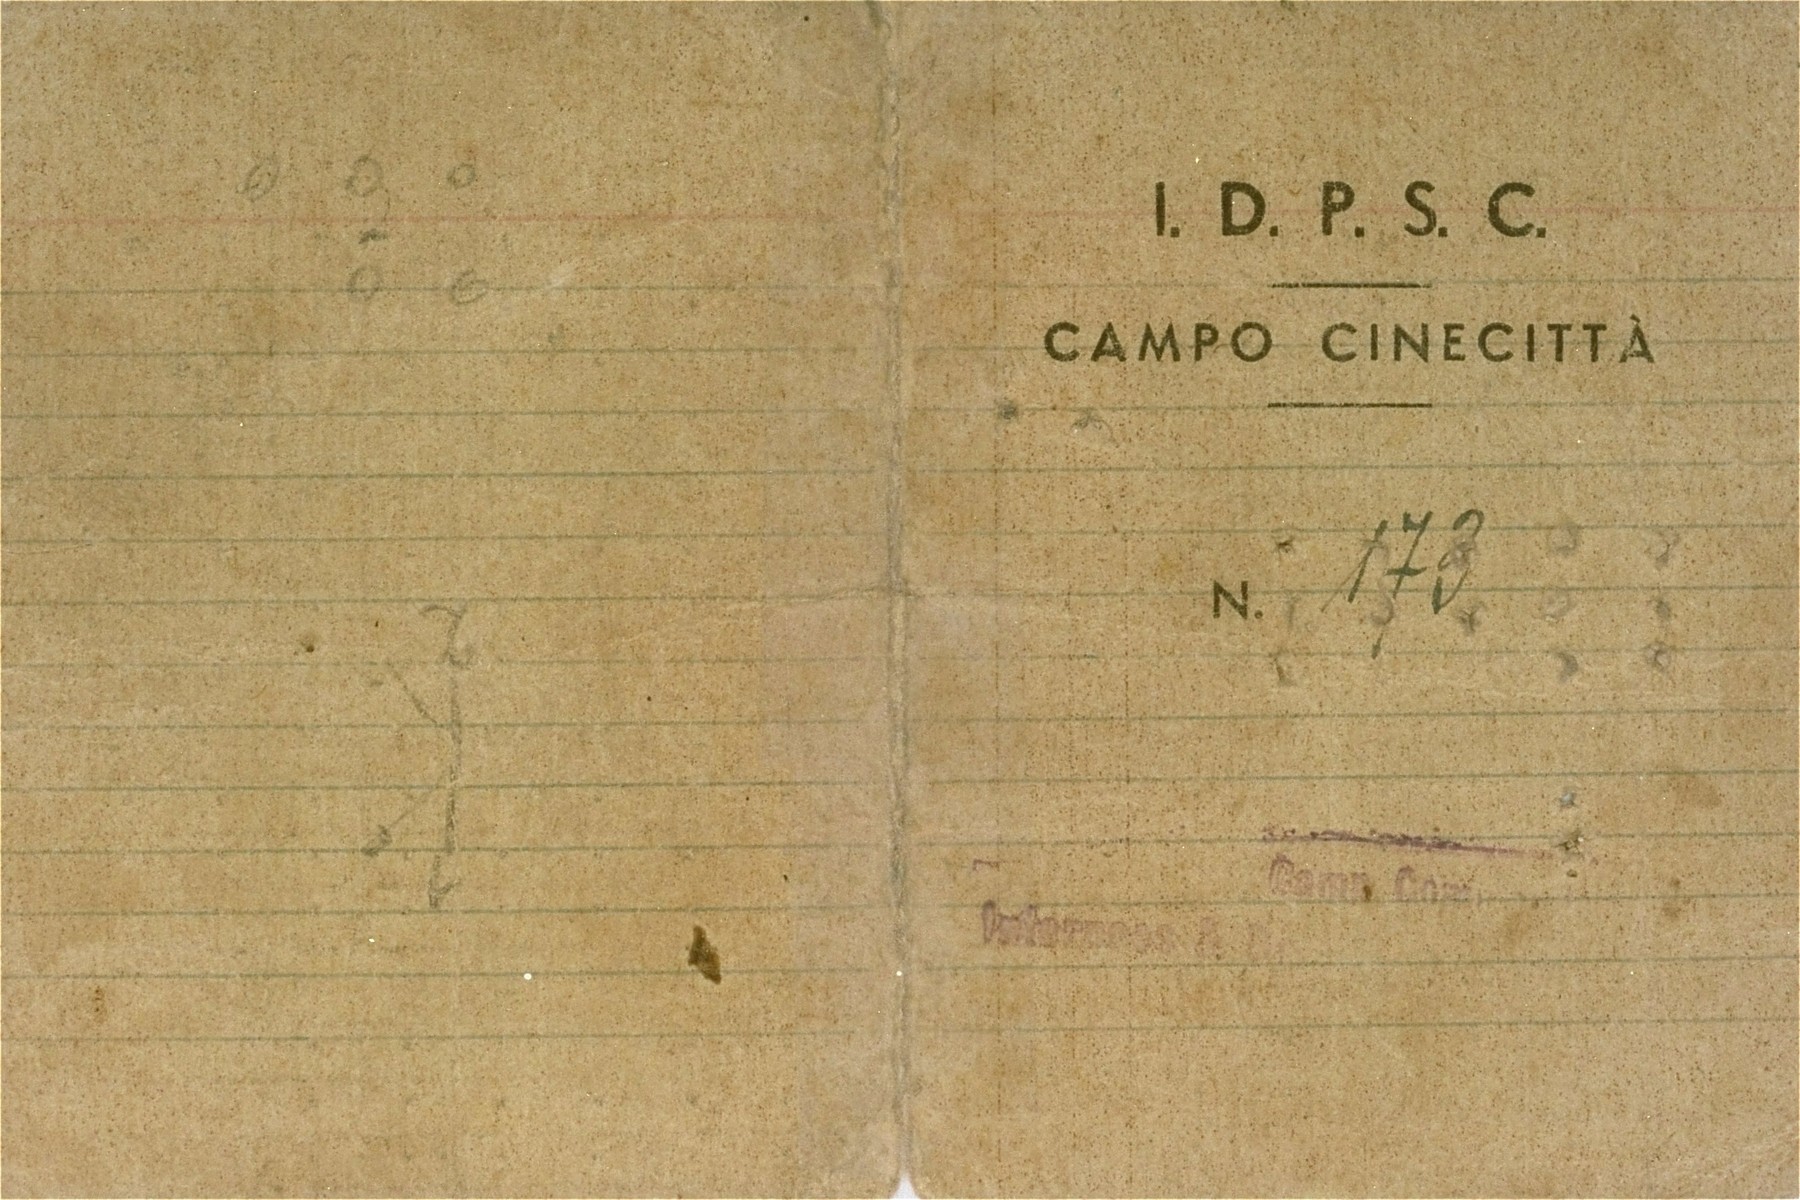 Cover of the ration booklet of Ilonka Bergl, a Jewish DP living at the Cinecitta displaced persons camp.